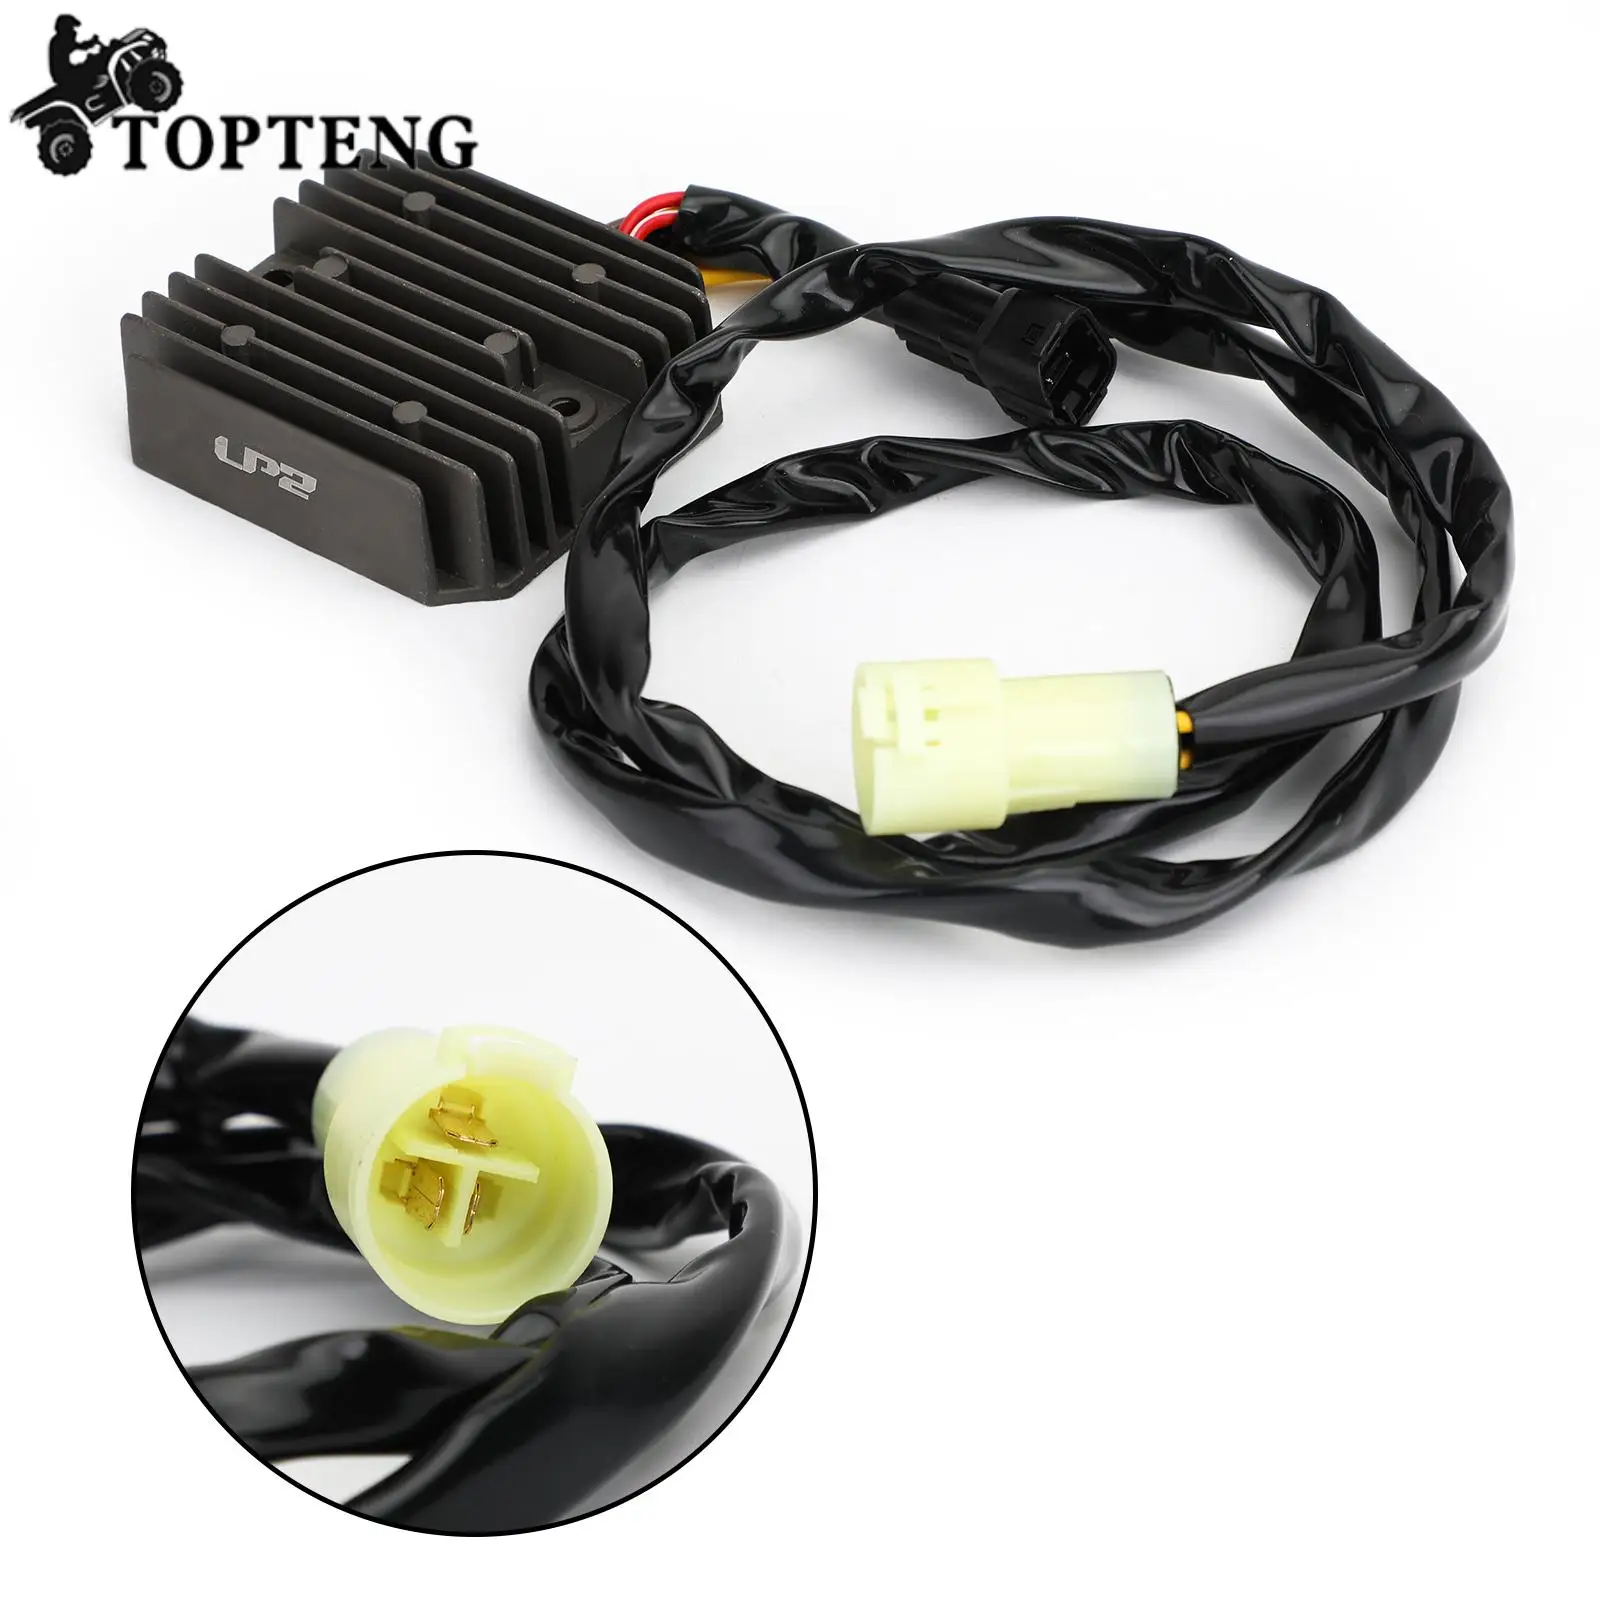 

Topteng For Arctic Cat ATV 650 V-Twin FIS 2004 2005 2006 4x4 V2 LE Automatic 0430-046 0430-035 Voltage Regulator Rectifier